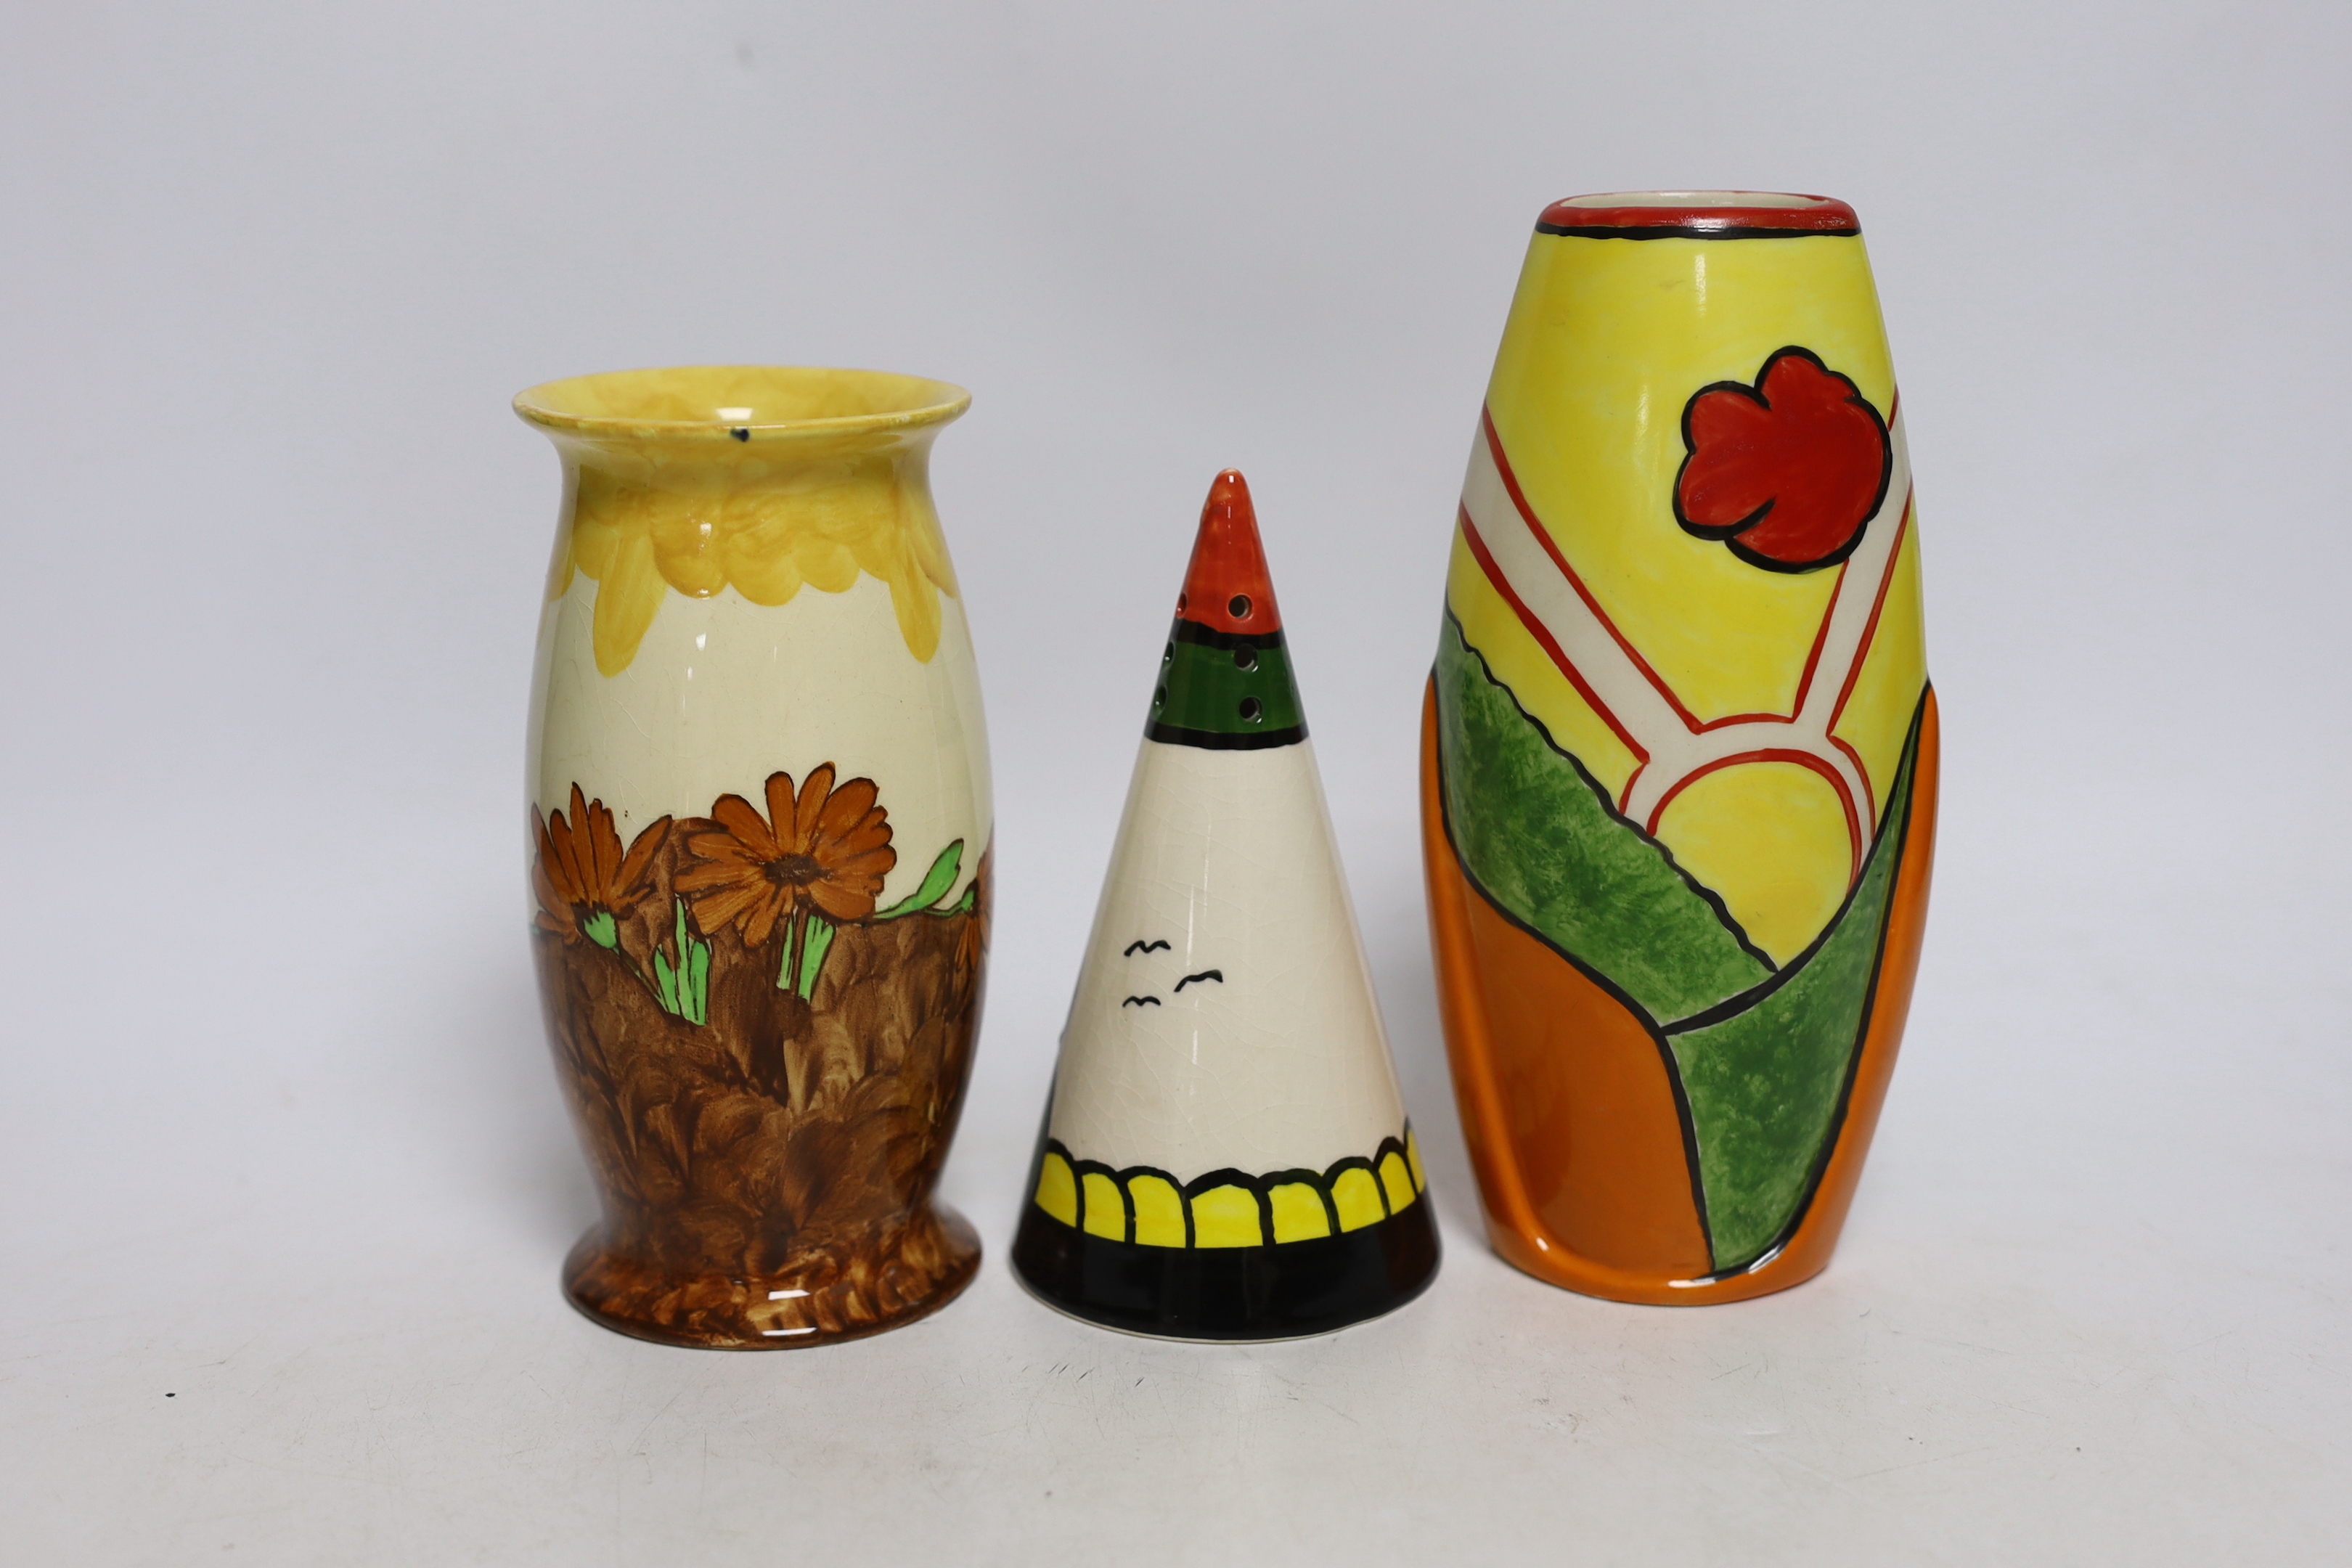 A Bernadette Eve “House” hand painted conical sugar sifter, a limited edition Heron Cross “Sunny Meadow” vase painted by Denise Steele 30/100 and a Burslem “Memory Lane” vase, all in Clarice Cliff style, tallest 18.5cm